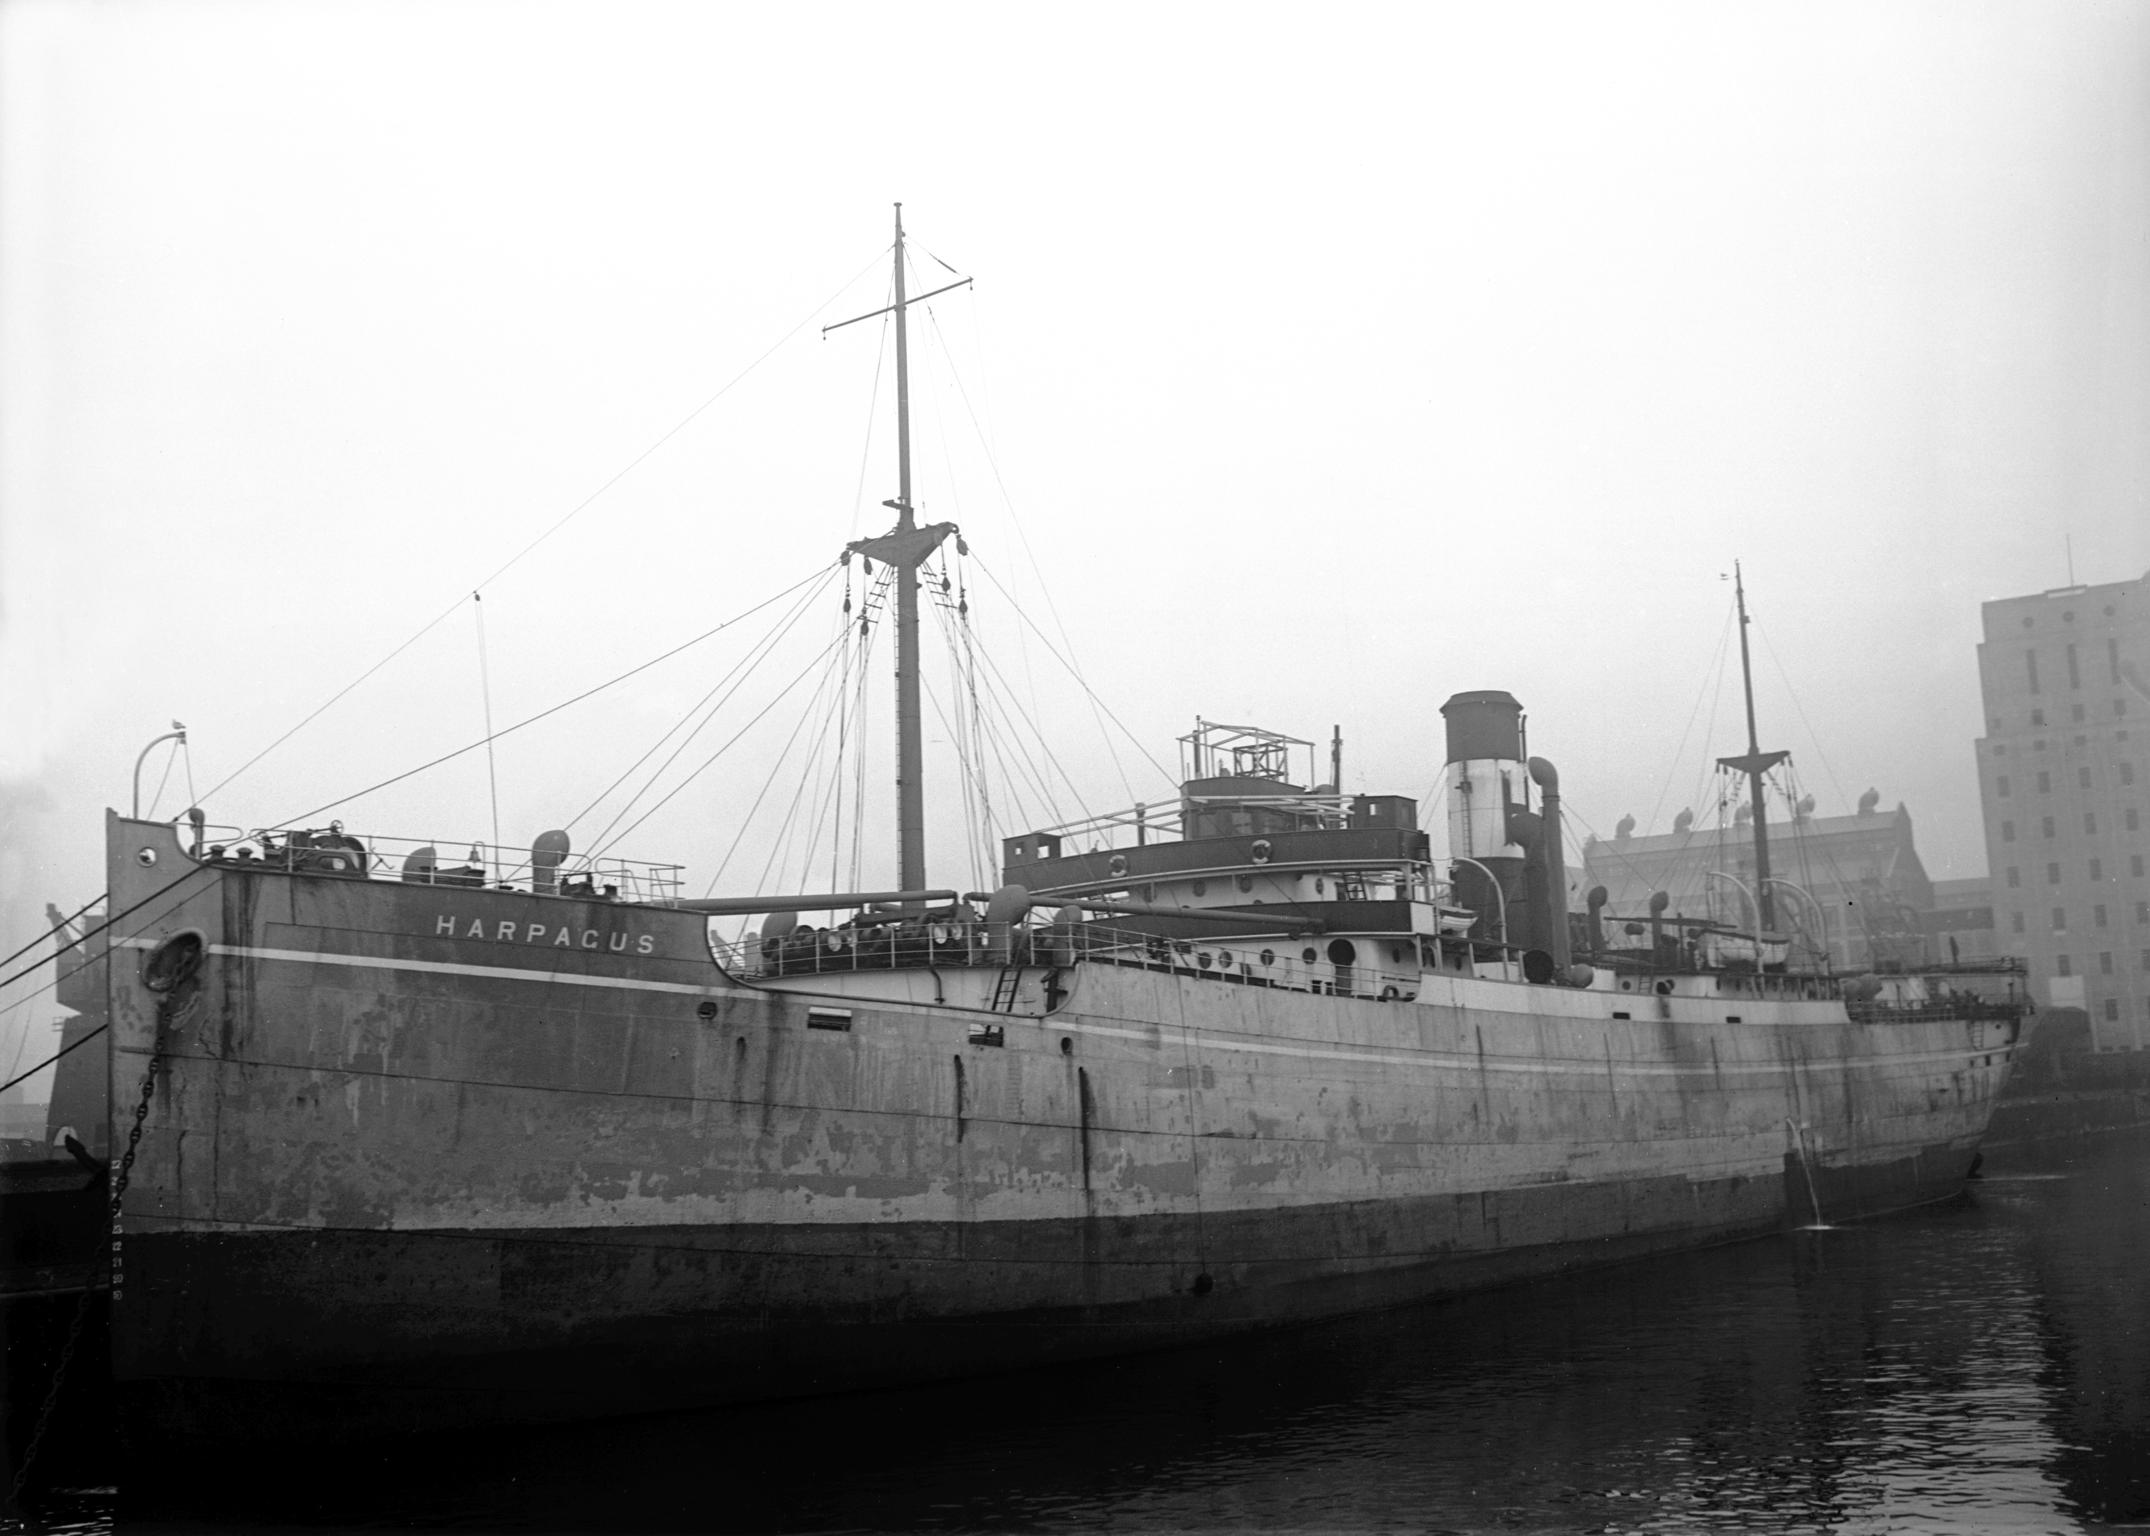 S.S. HARPACUS, glass negative